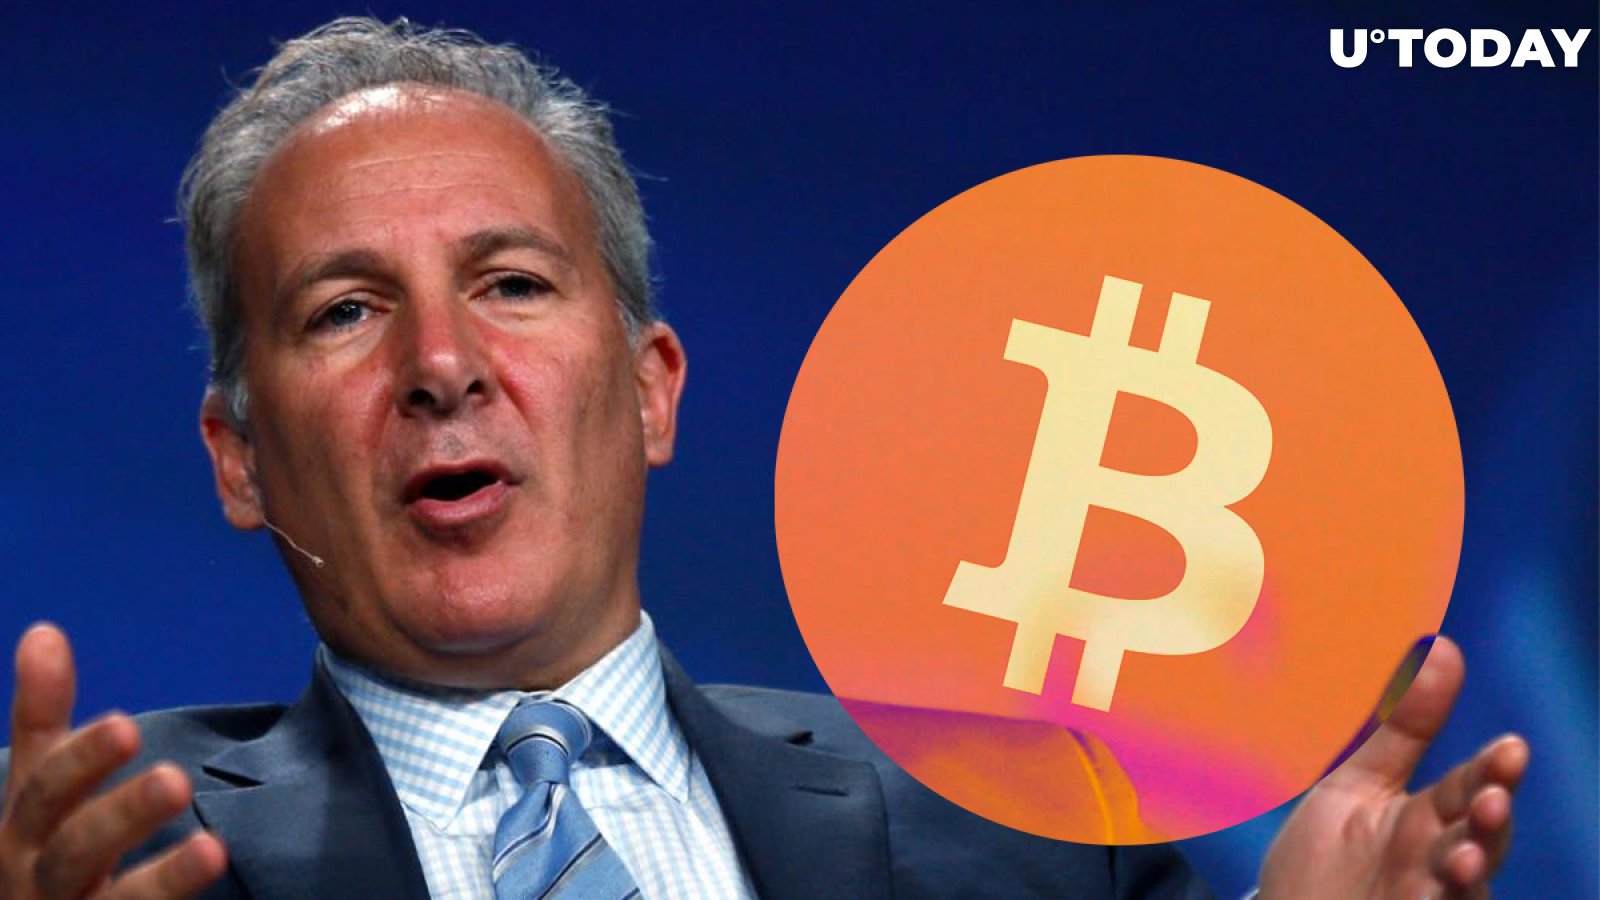 Peter Schiff Becomes Bitcoin Influencer #2 in 2020, Sharing List with Pomp and Max Keiser